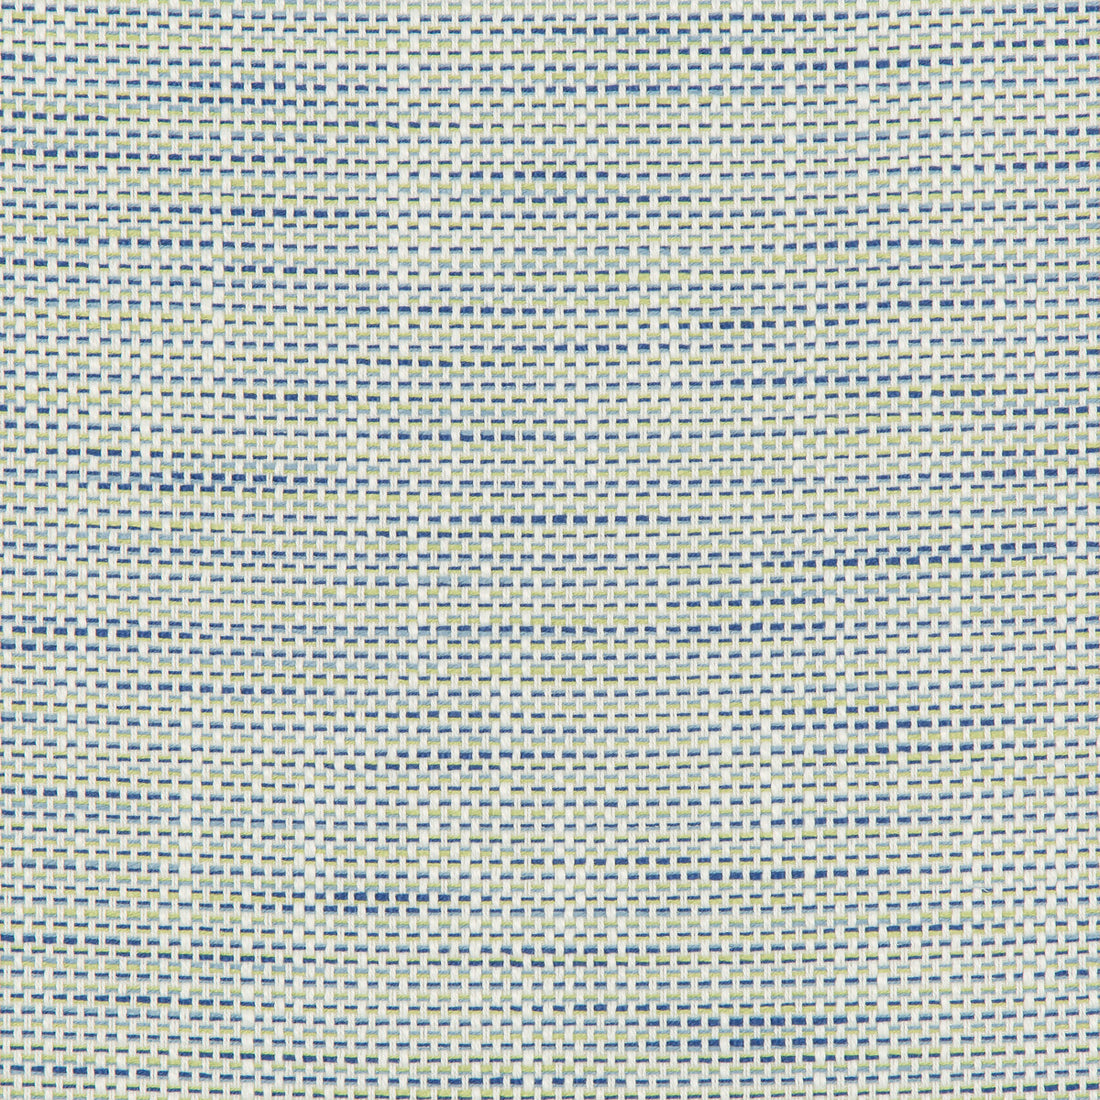 Kravet Design fabric in 36082-315 color - pattern 36082.315.0 - by Kravet Design in the Inside Out Performance Fabrics collection